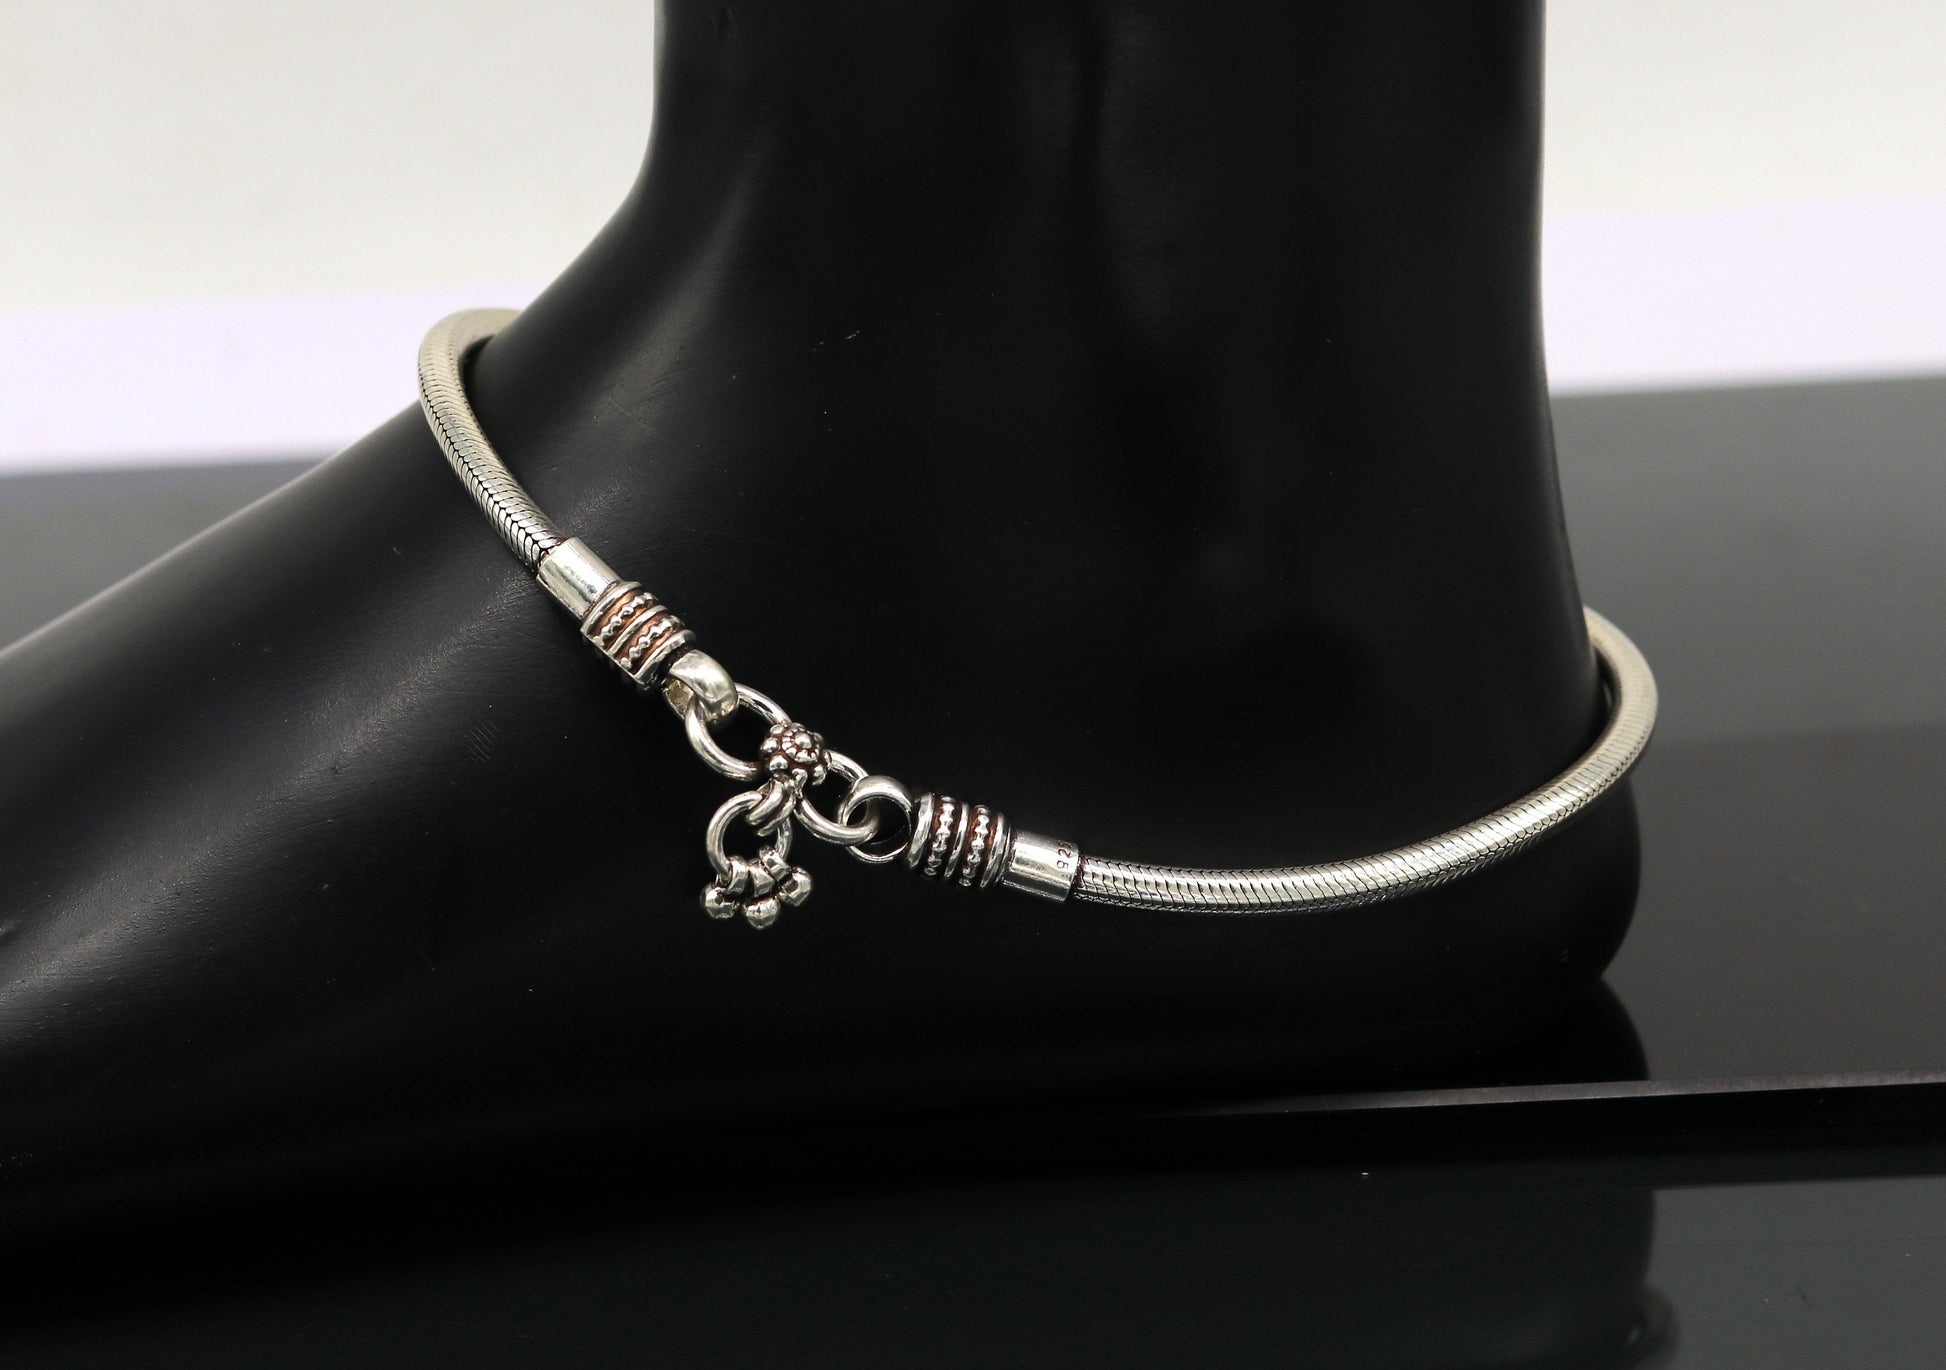 10.5" 925 solid silver handmade 4mm snake chain ankle bracelet, vintage customized style charm anklets, tribal belly dance jewelry nank252 - TRIBAL ORNAMENTS